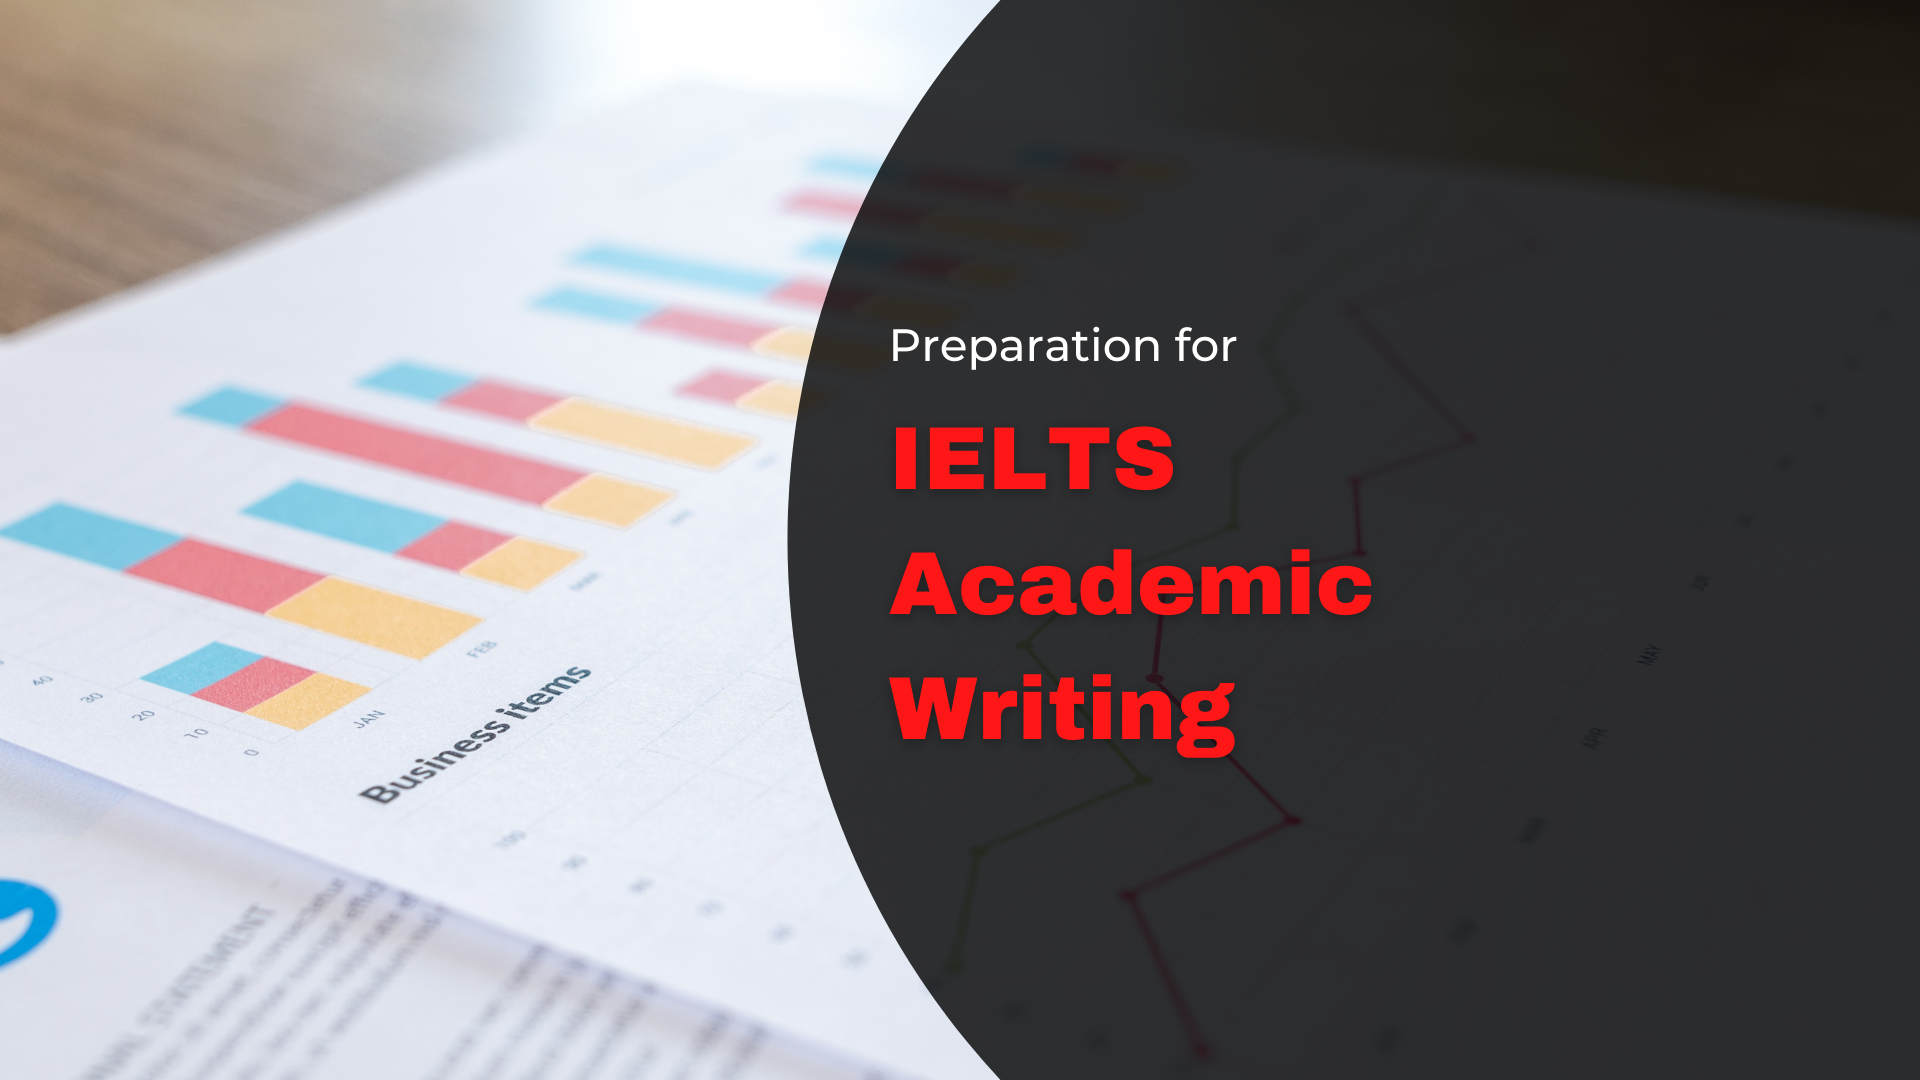 Preparation for IELTS Academic Writing course image